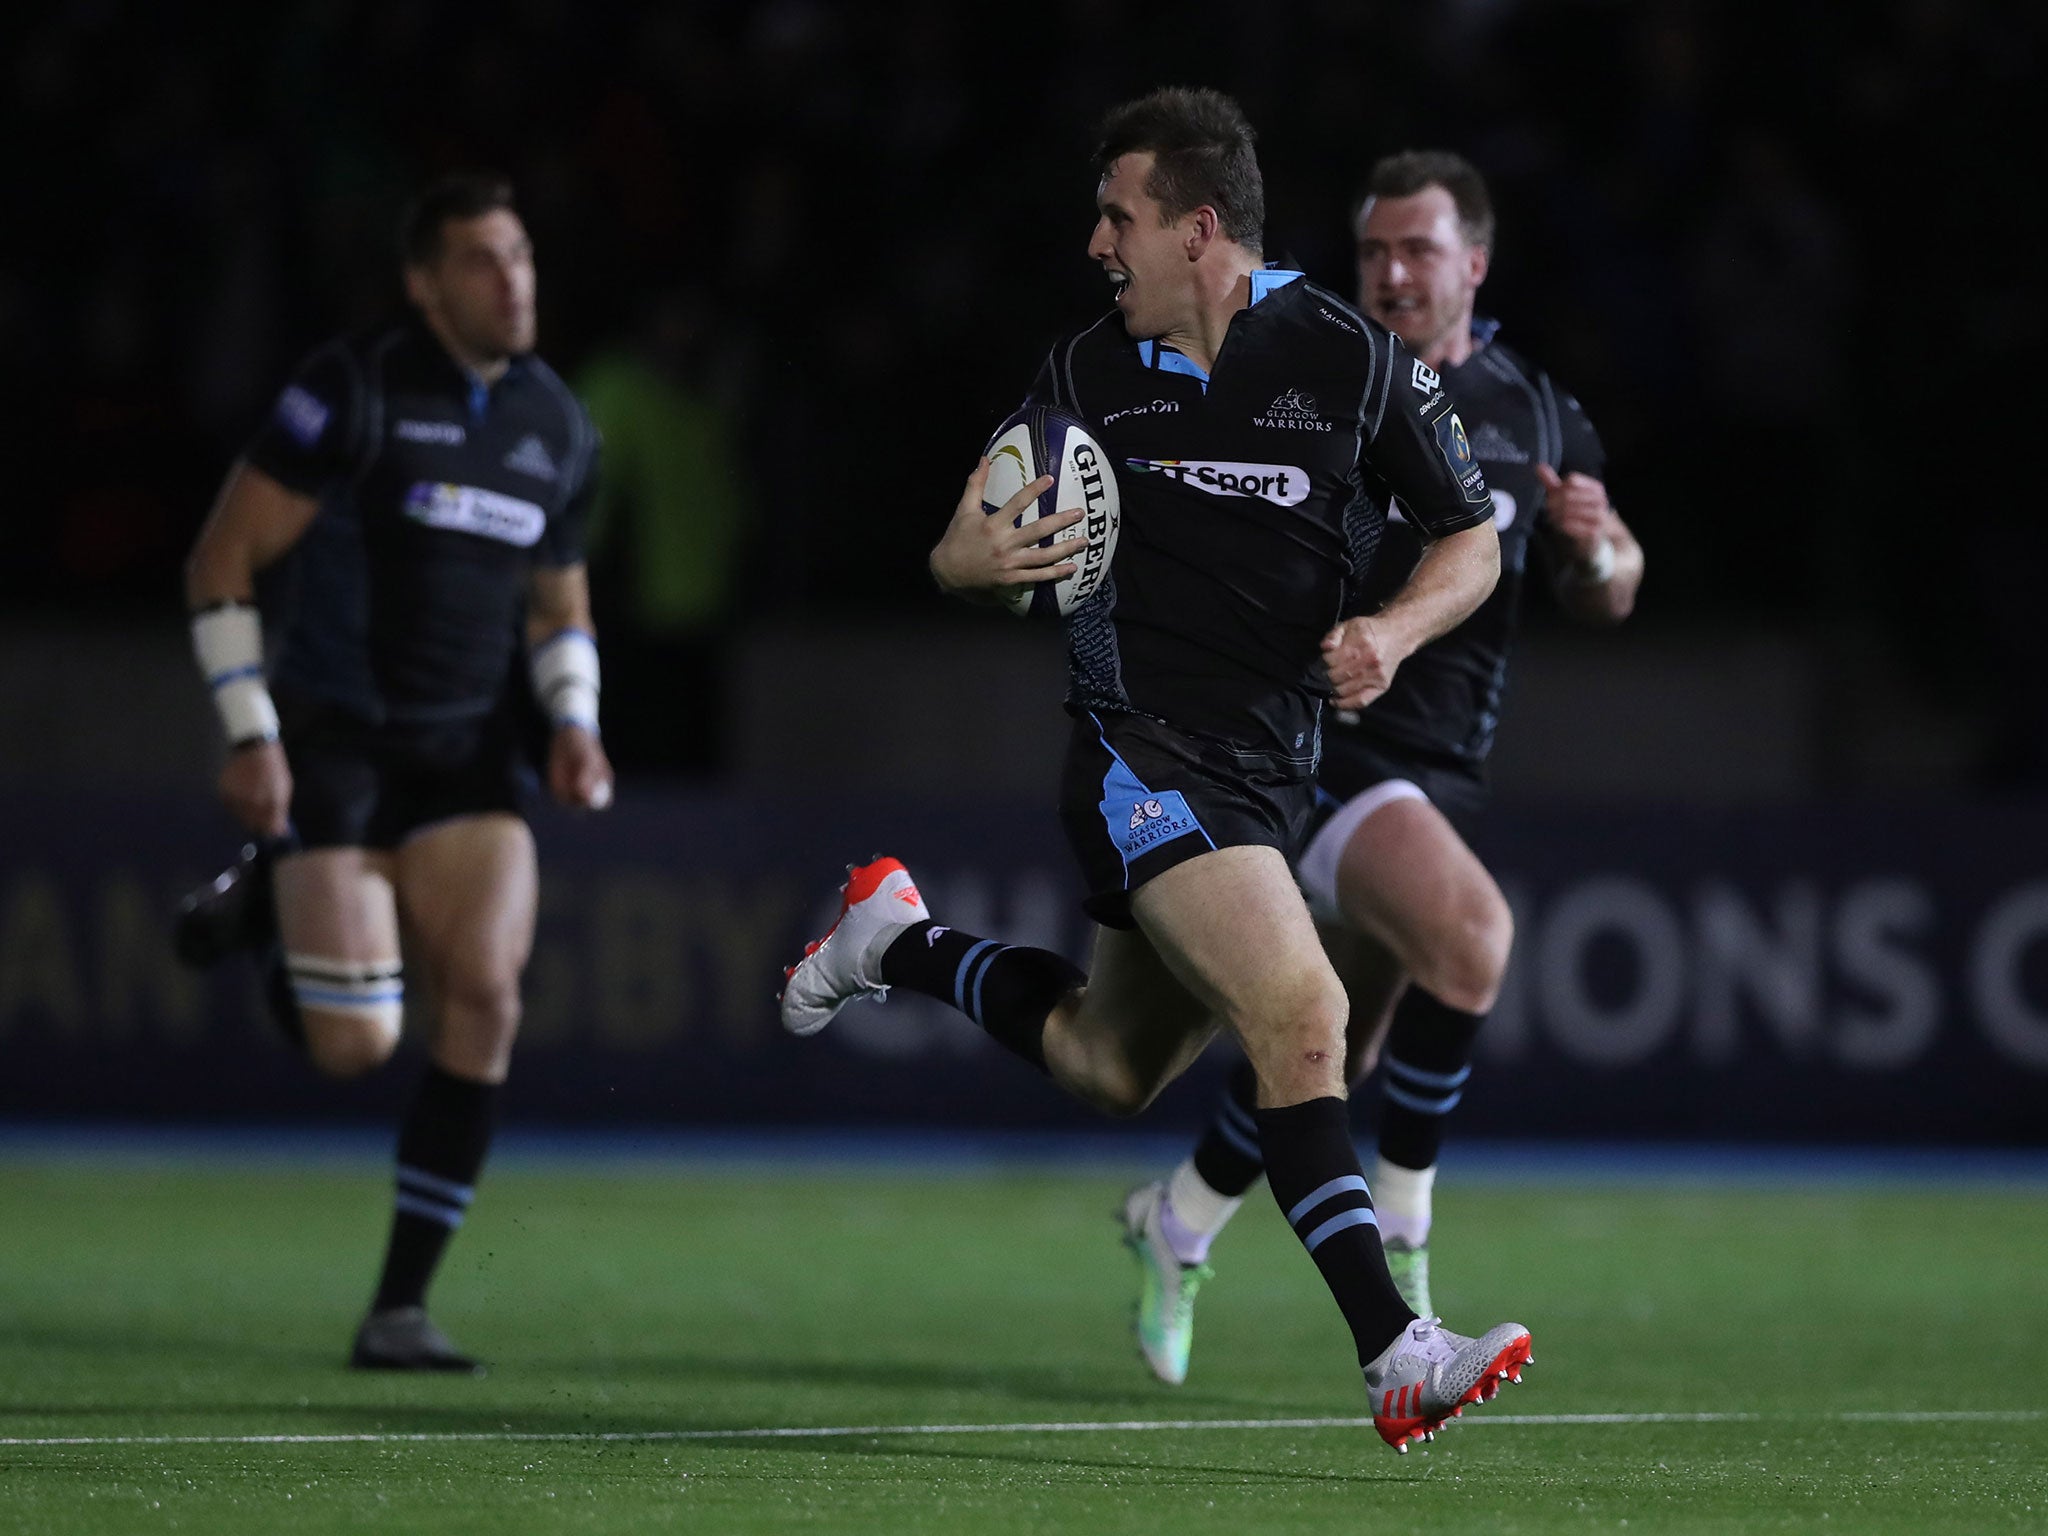 Mark Bennet of Glasgow runs in his first try during the European Rugby Champions Cup match between the Warriors and Leicester Tigers at Scotstoun Stadium